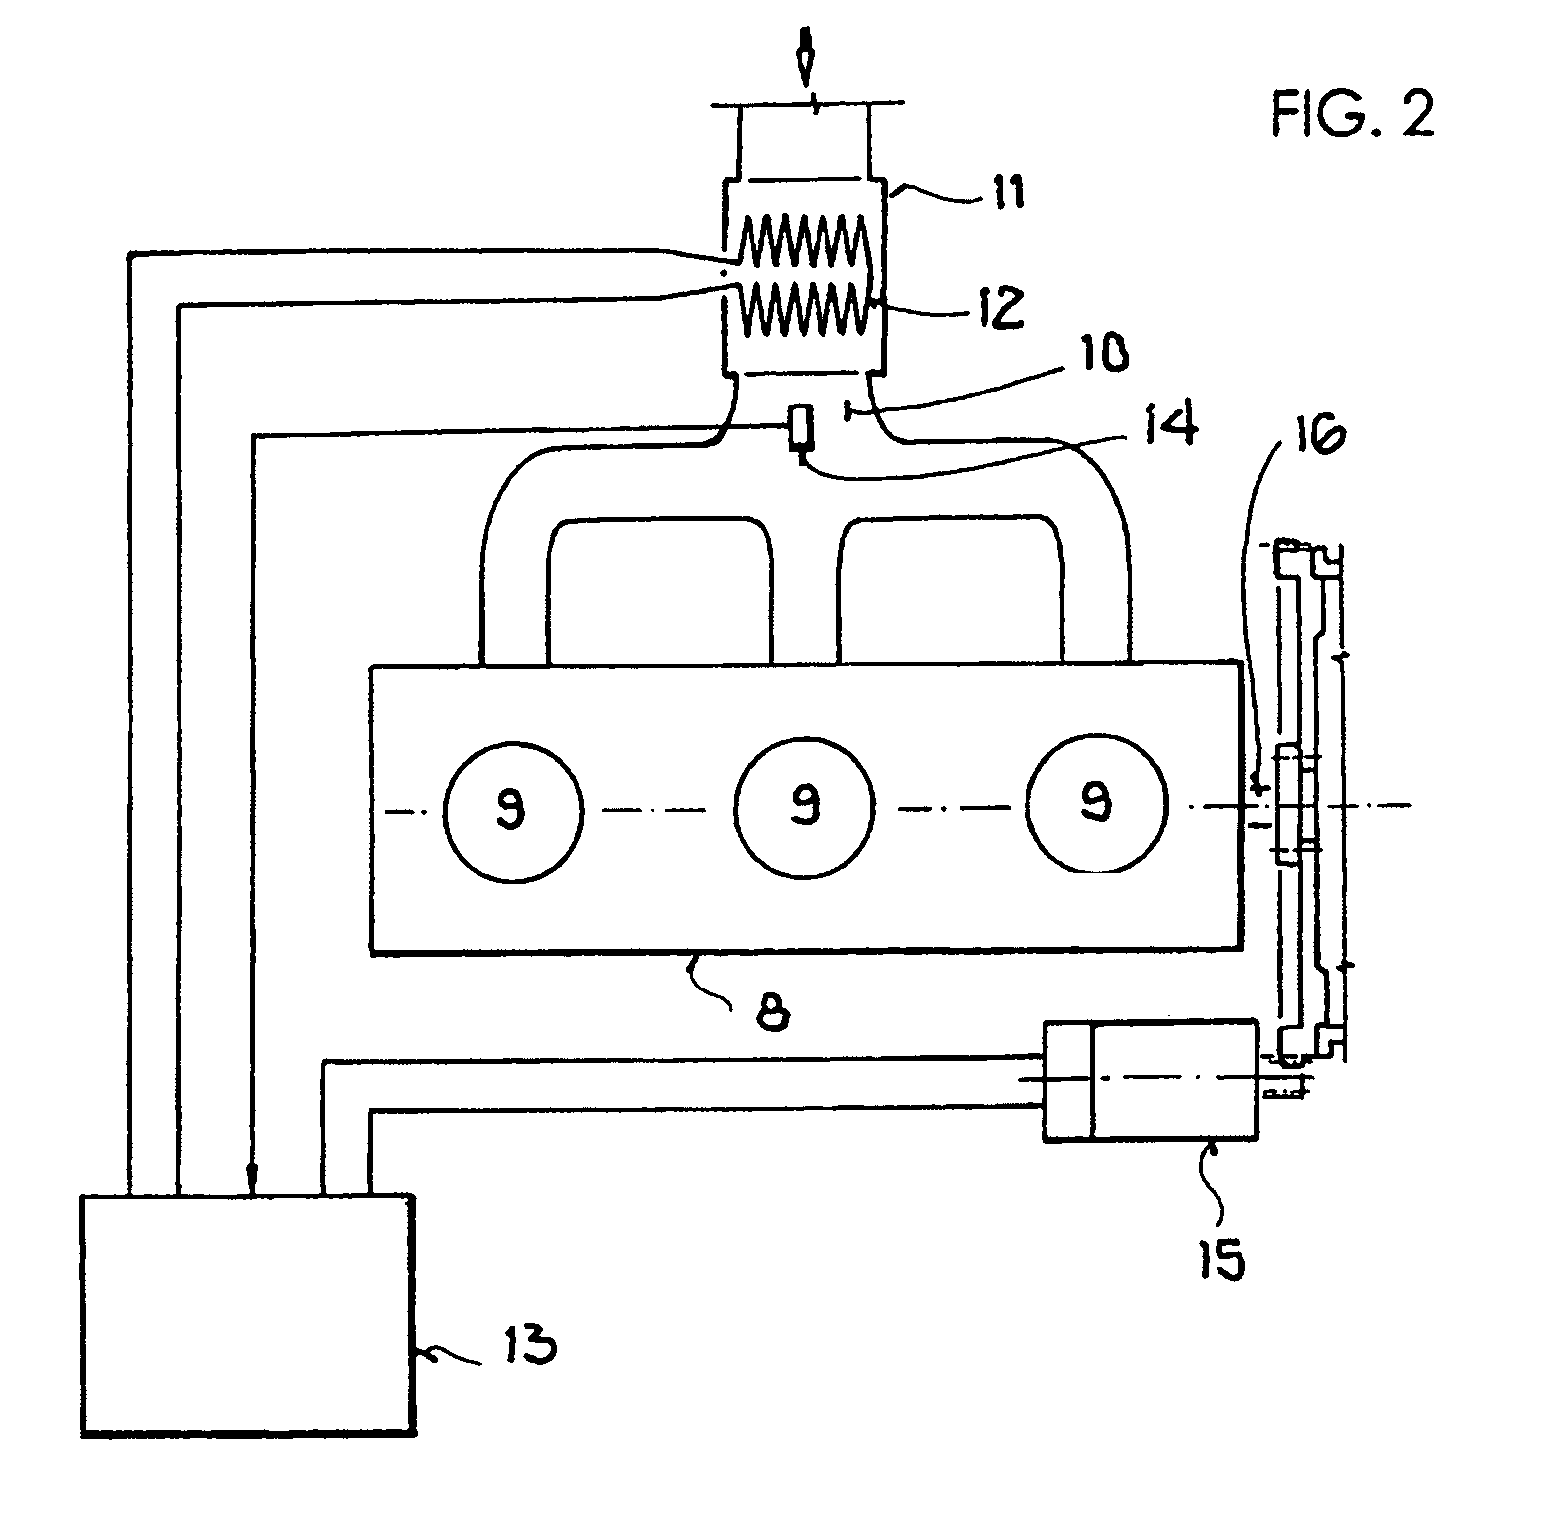 Control of an electrically heated pre-heating device for cold-starting internal combustion engines